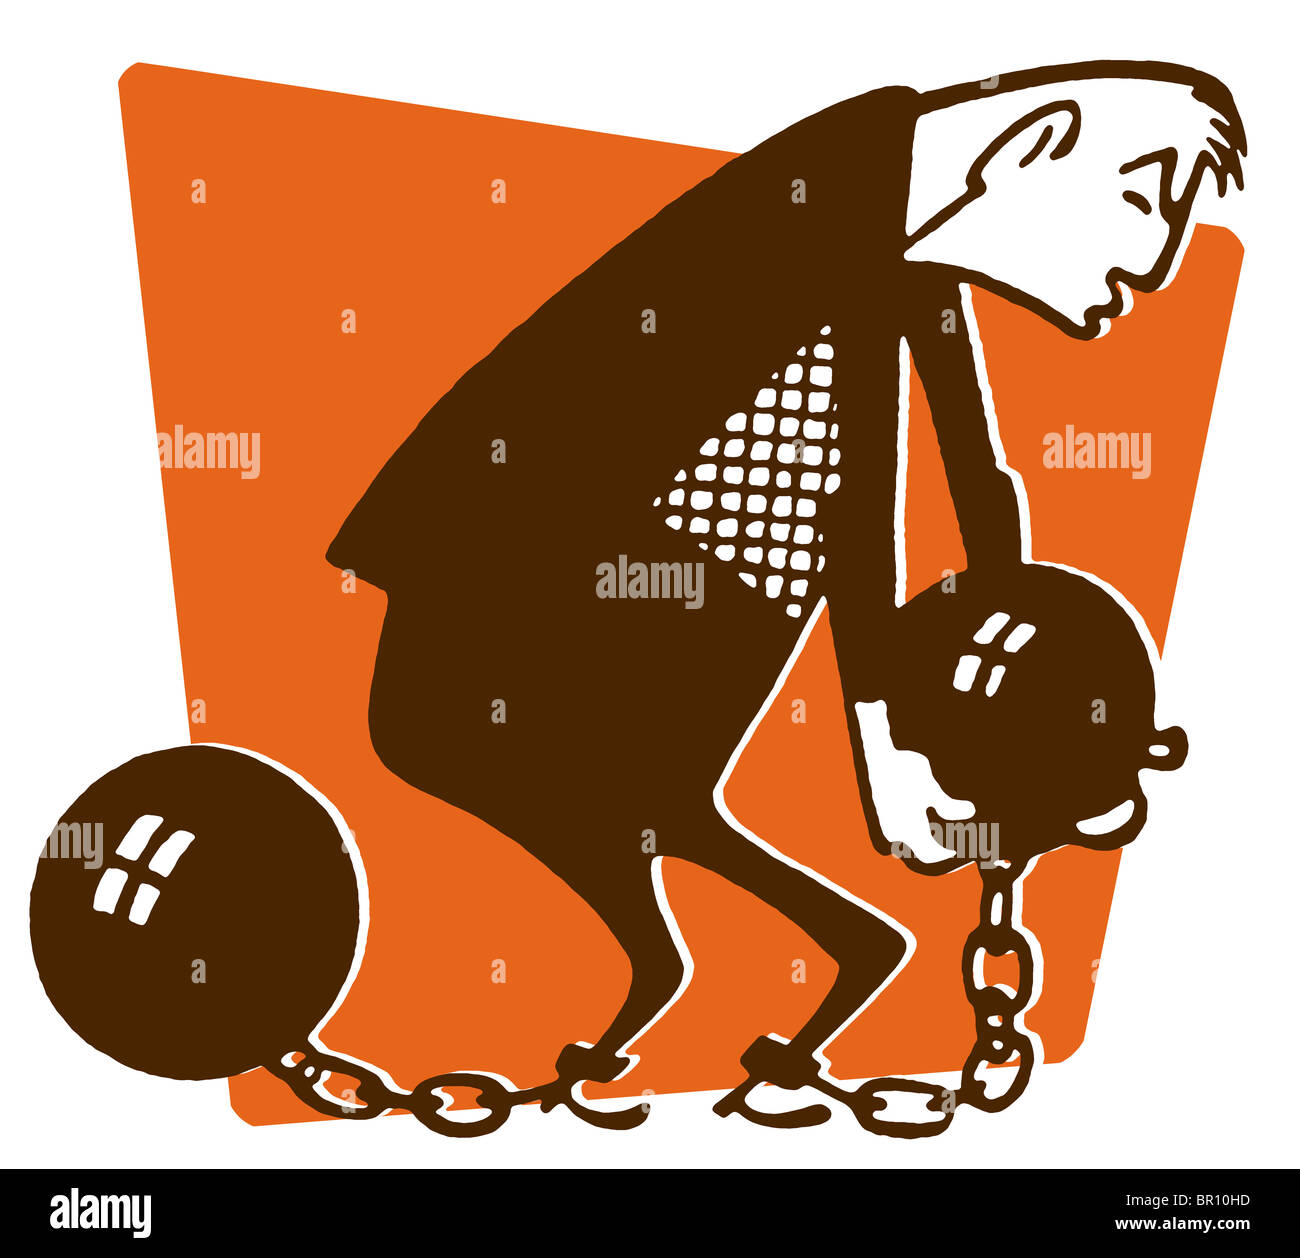 An illustration of a man carrying a ball and chain Stock Photo